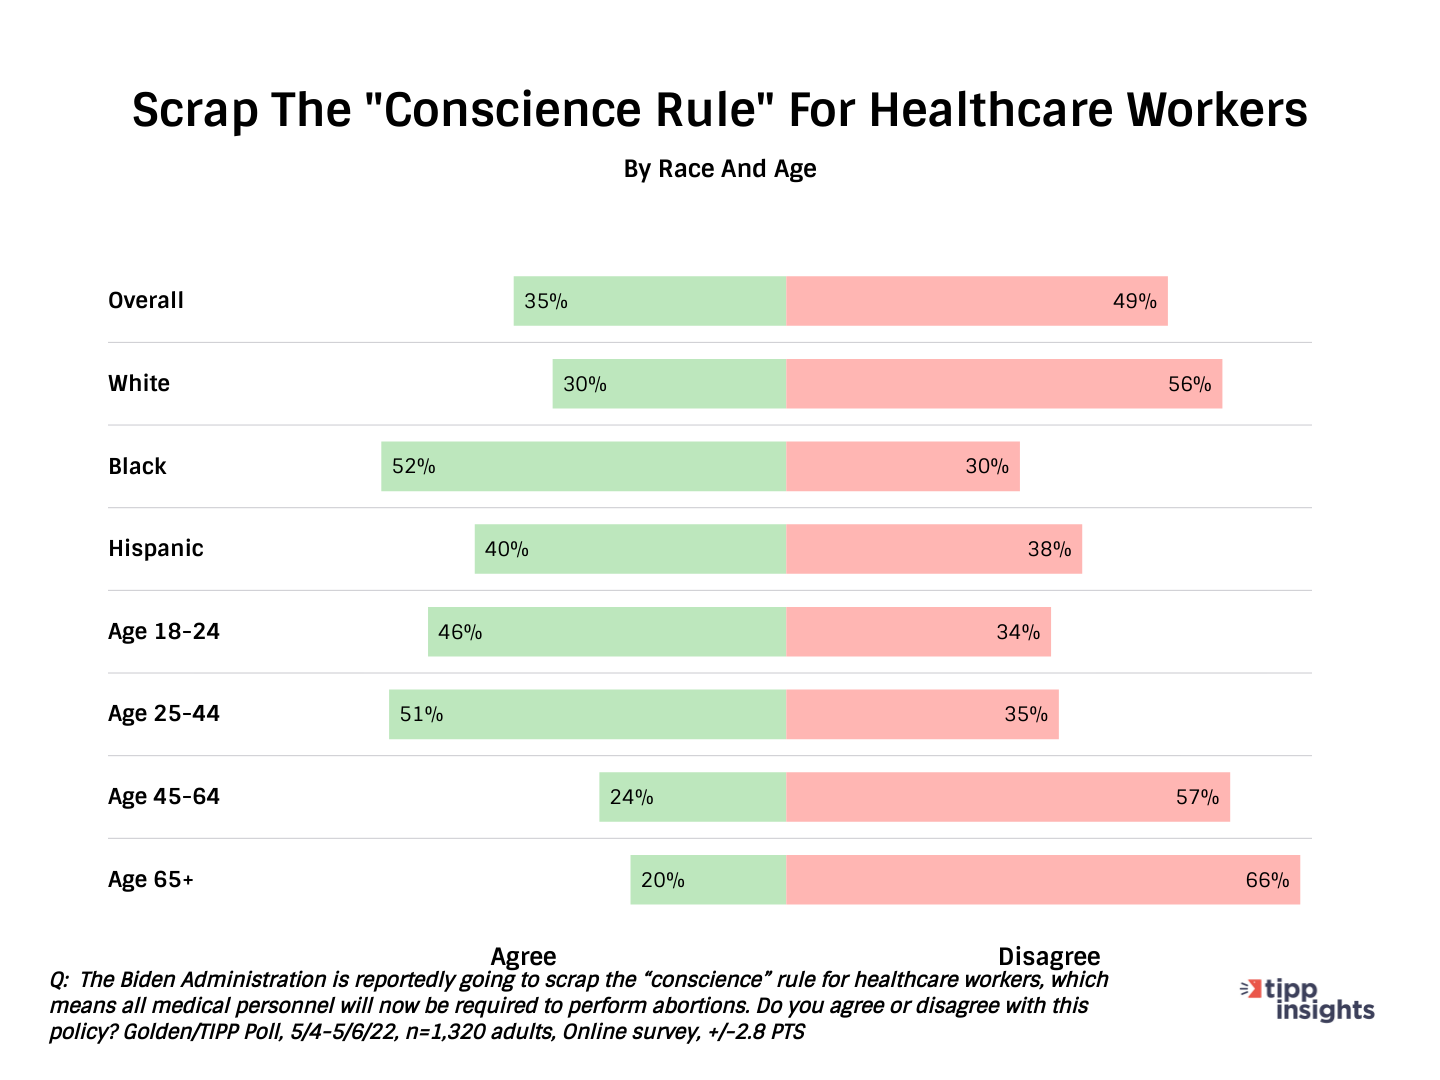 More oppose than support plans to scrap health workers "conscience" rule. By age and race